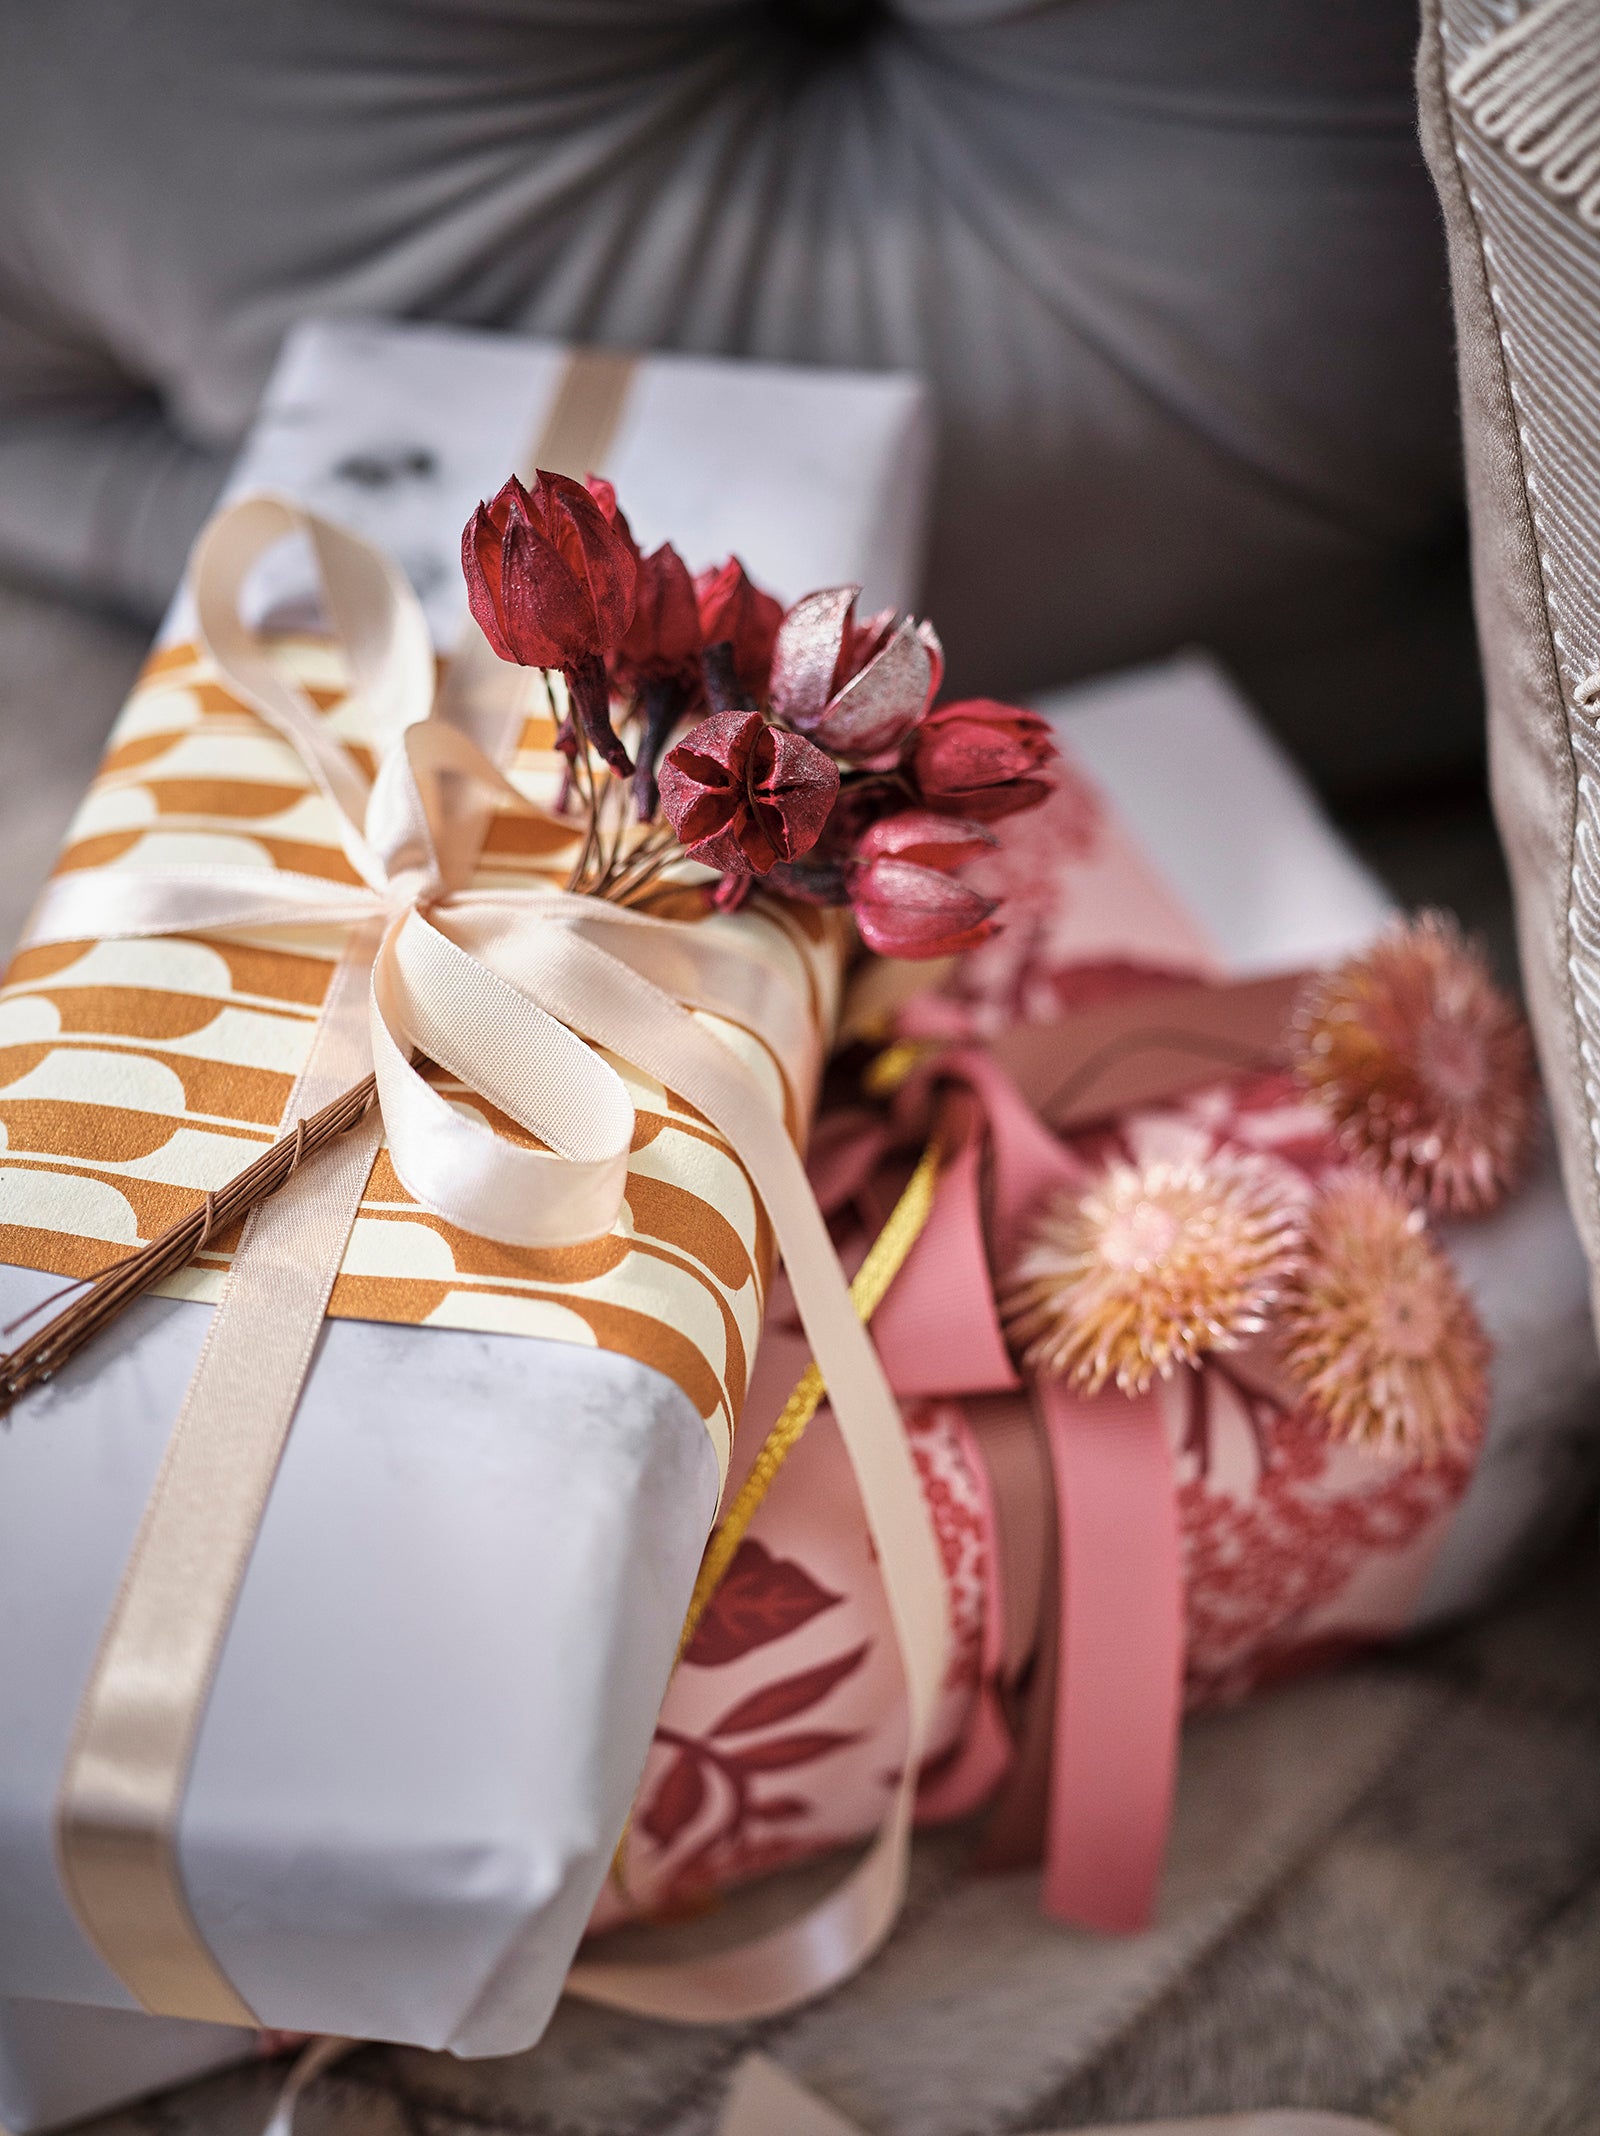 Close up of gift wrapped presents decorated with ribbons and dried flowers.